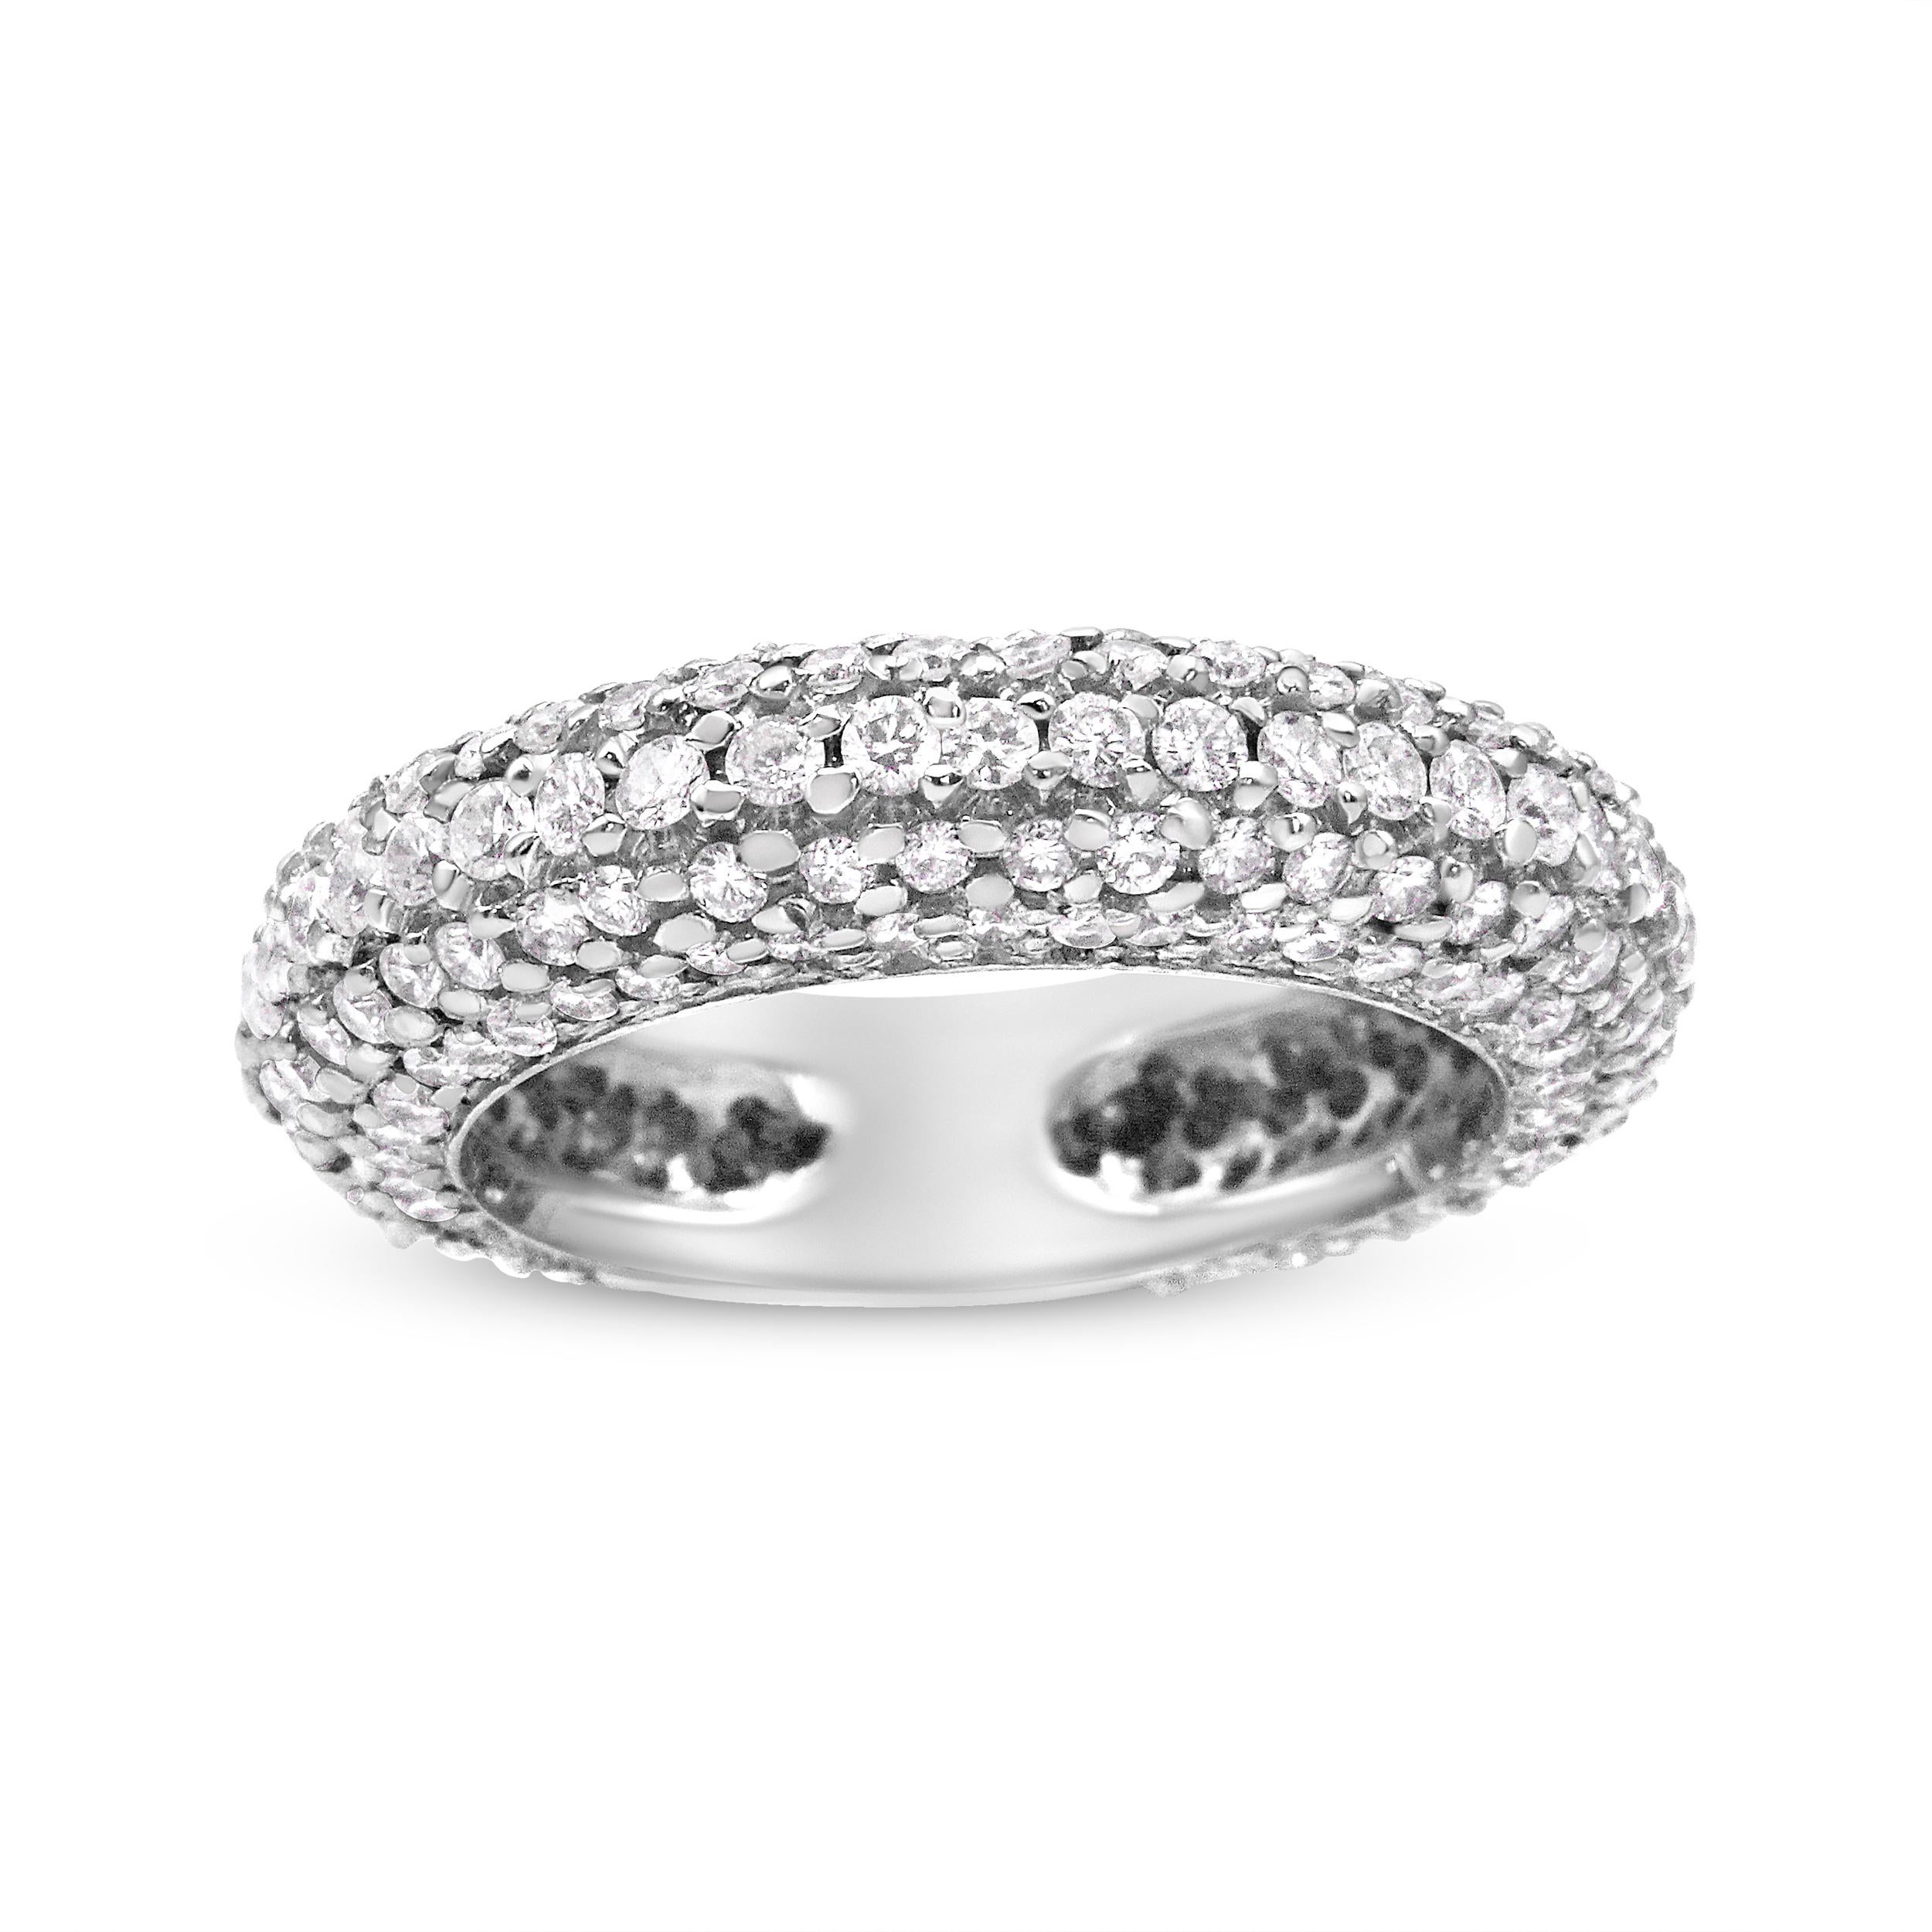 Indulge in the splendor of this exquisite ring, skillfully crafted to showcase a stunning array of pave set natural diamonds. The design features multiple rows of these authentic diamonds, meticulously arranged to cover the majority of the ring's